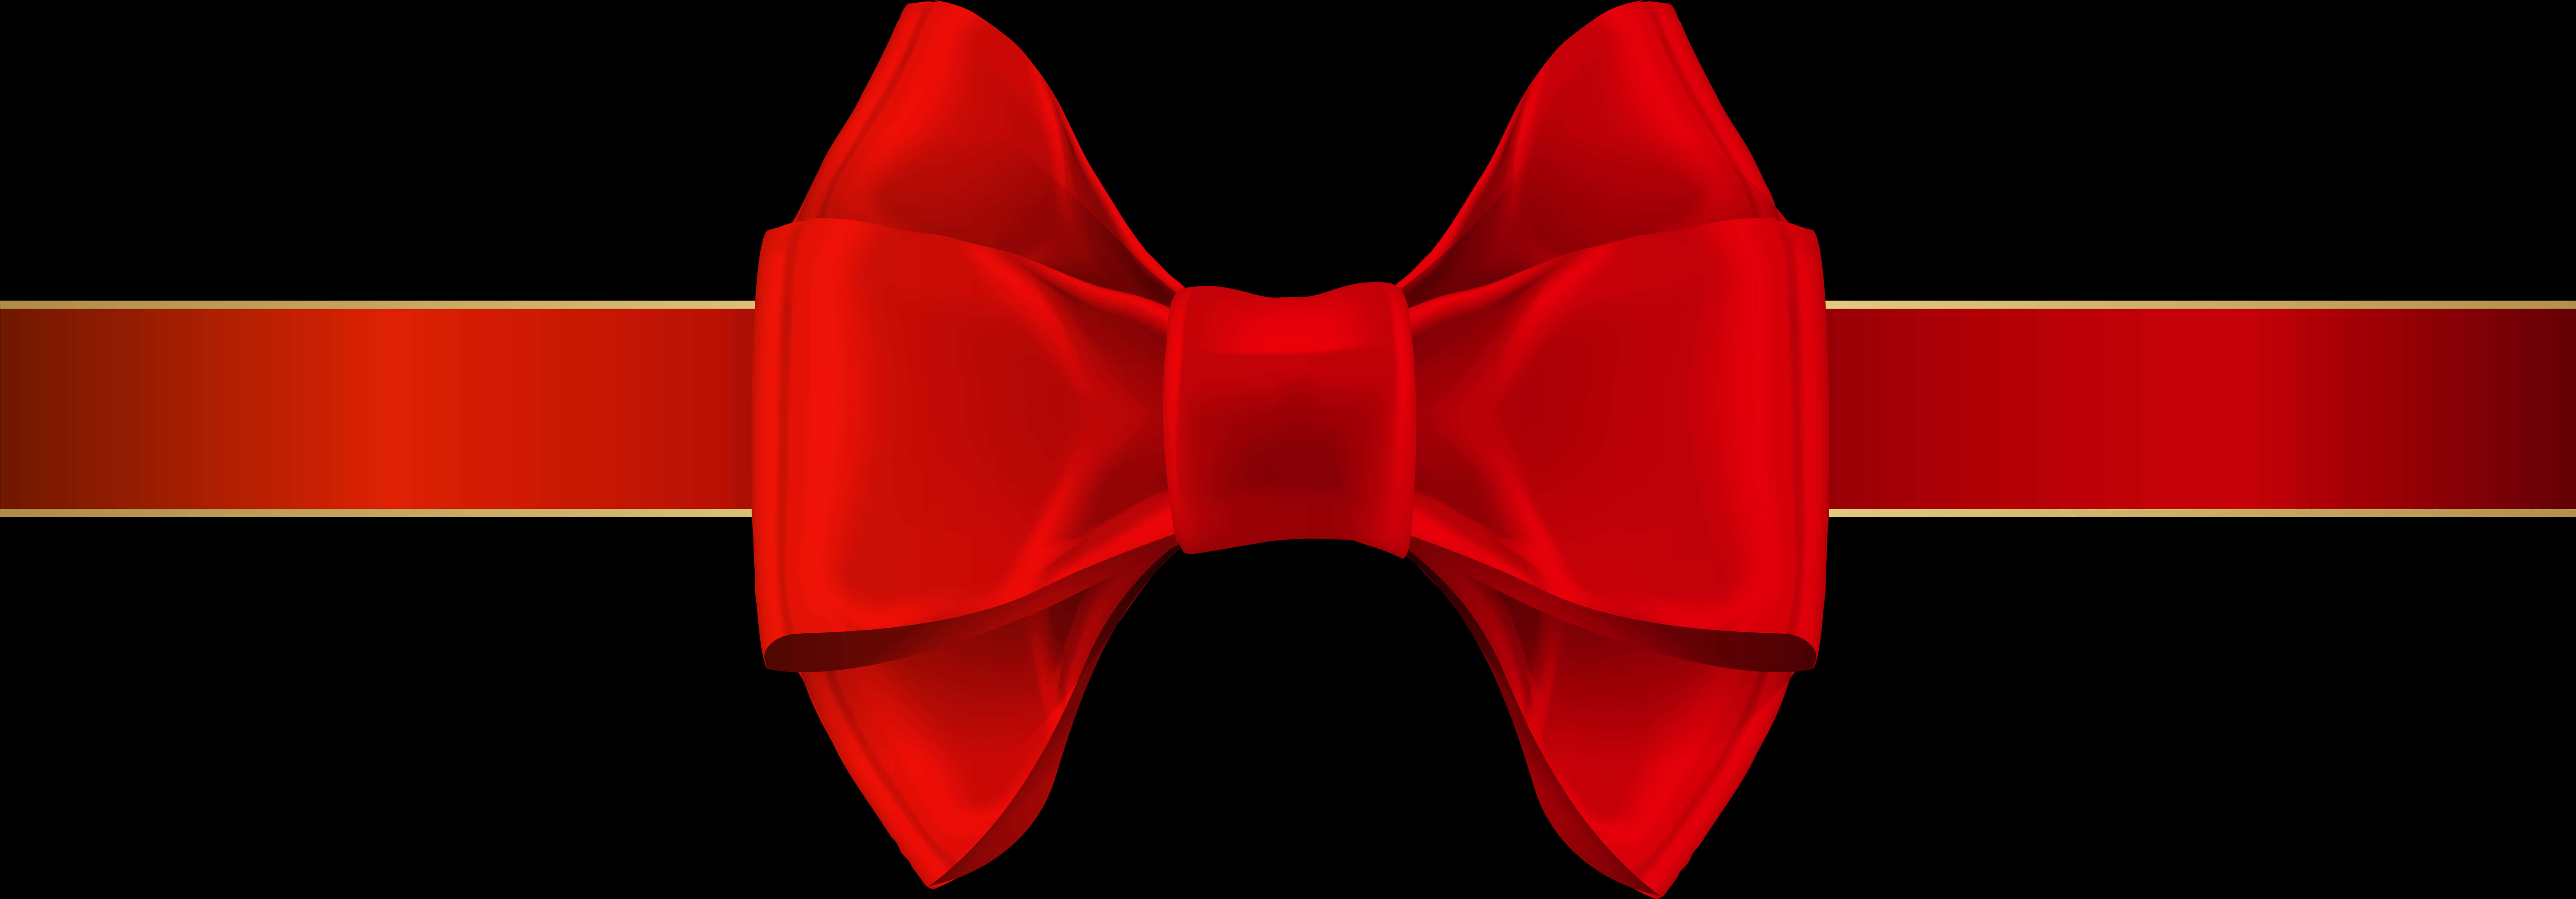 Red Bow Tie Black Background